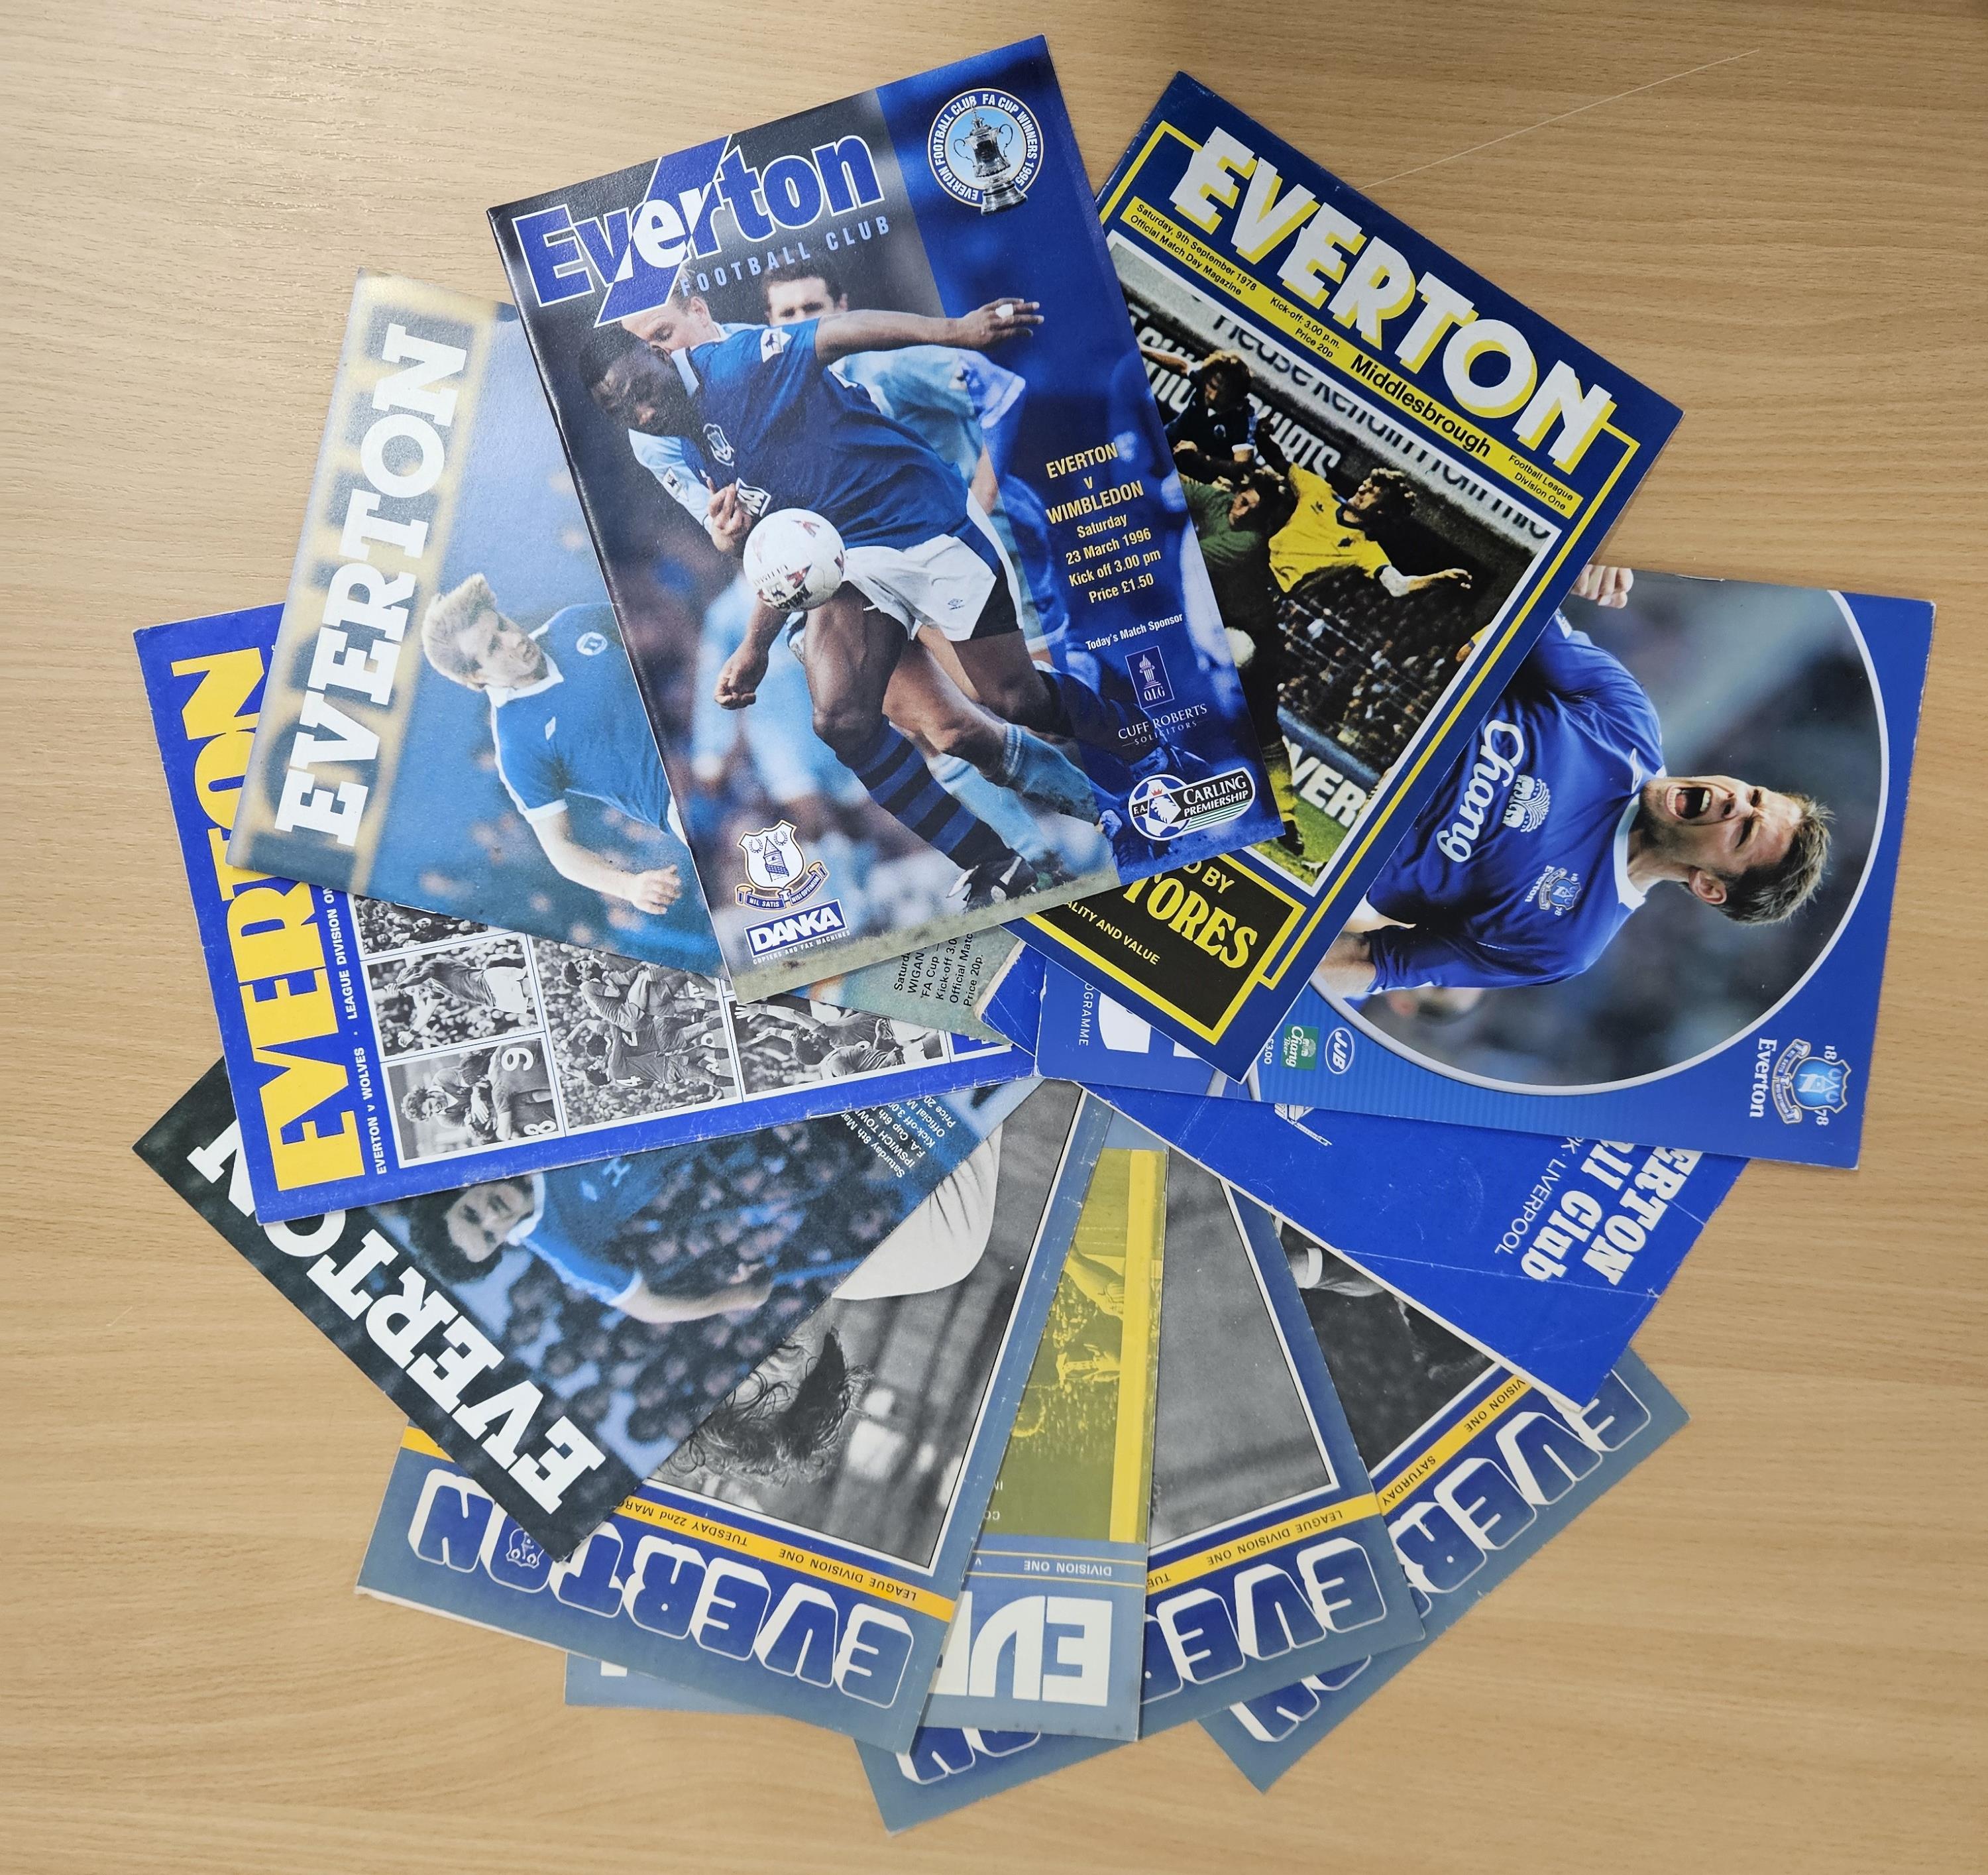 Football collection of 10 Everton programmes from 1996, 2006, 1978, 1968, 1976 and 1977. Good